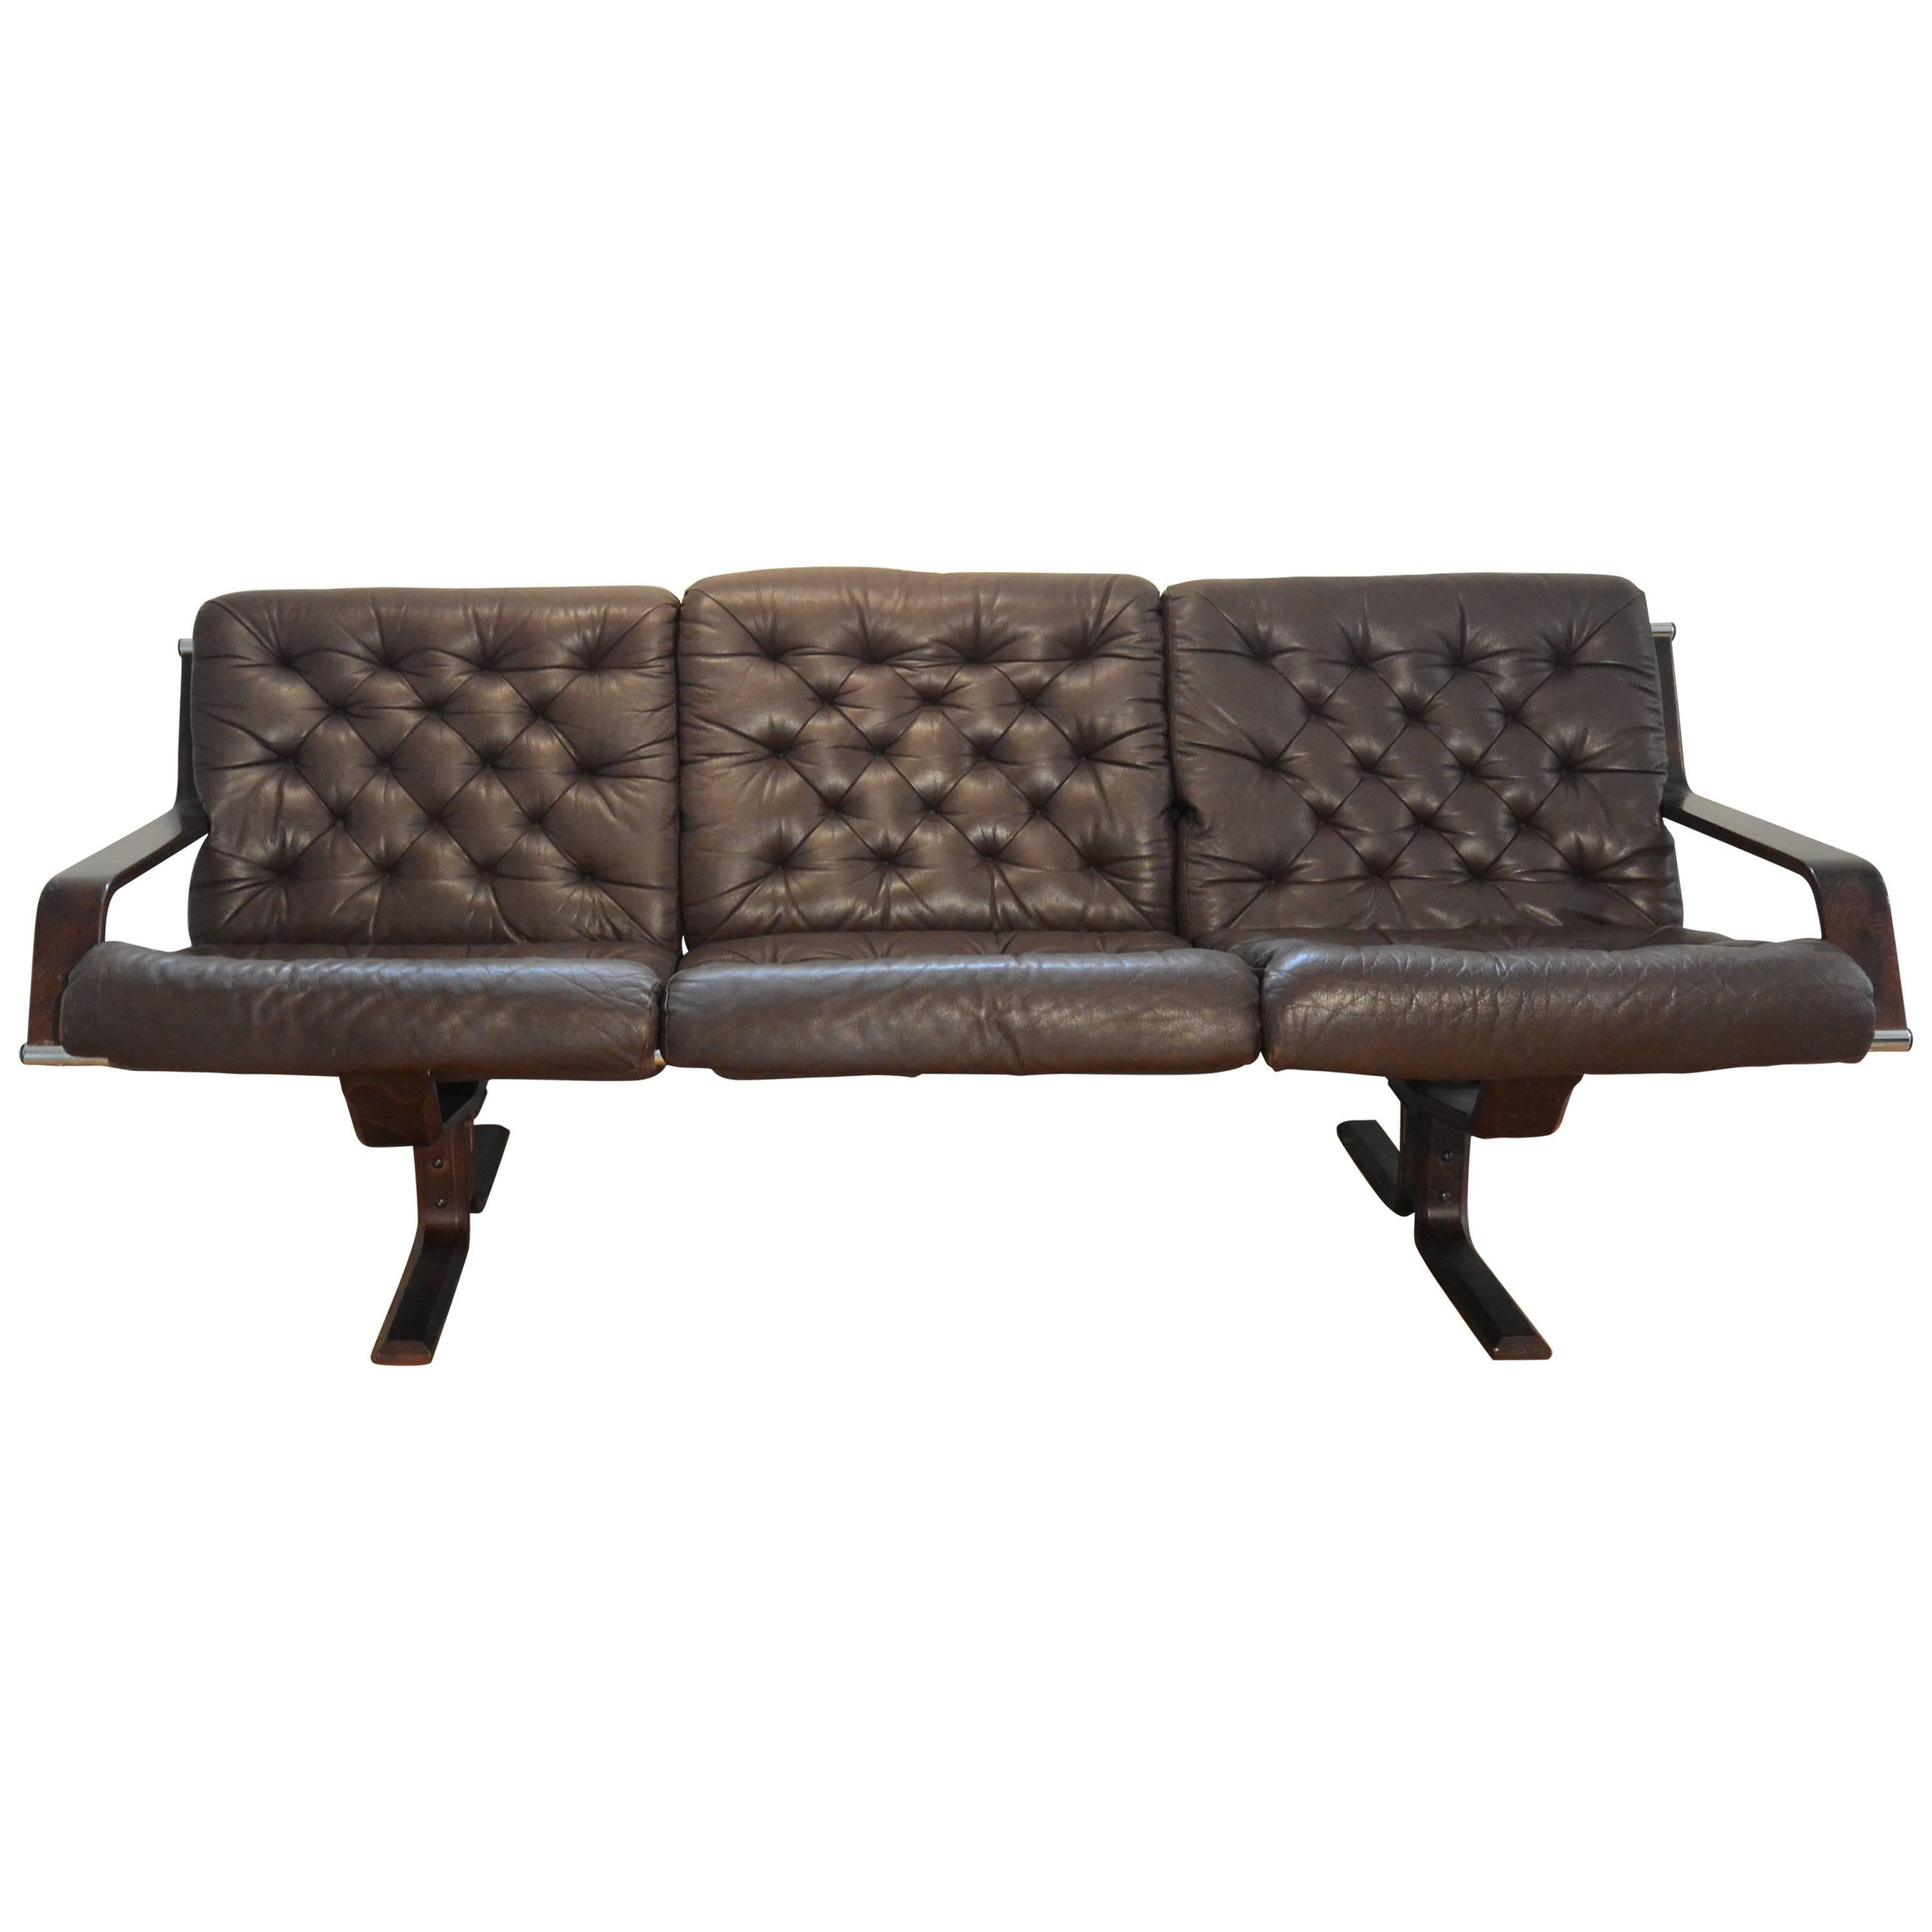 Rare Woodman Restman Sofa by Sigurd Ressell Vatne Møbler, Norway For Sale